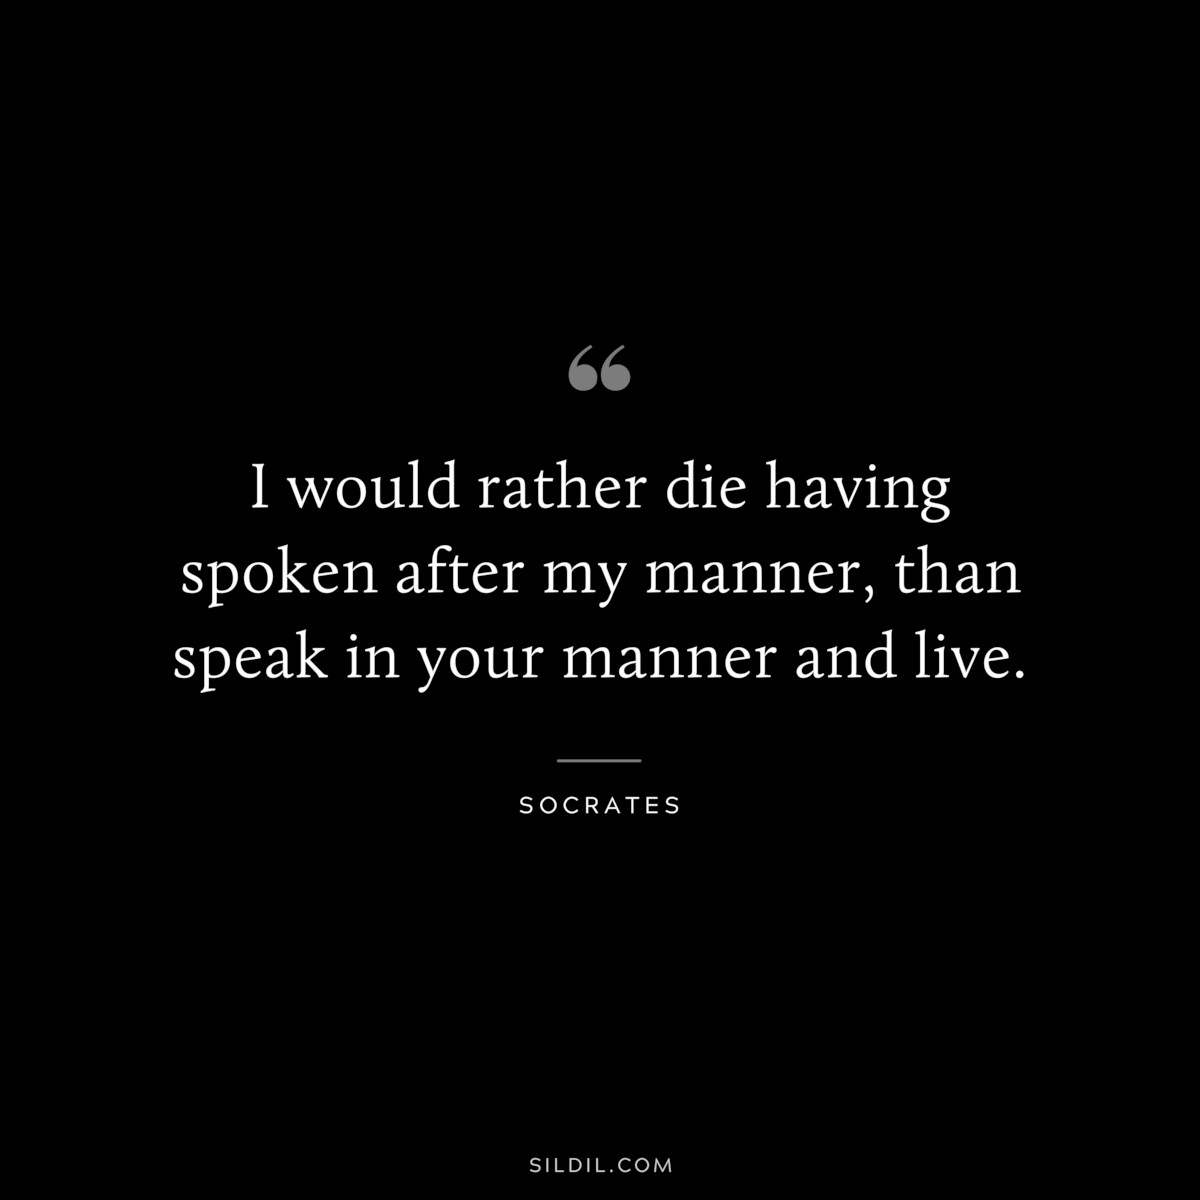 I would rather die having spoken after my manner, than speak in your manner and live. ― Socrates